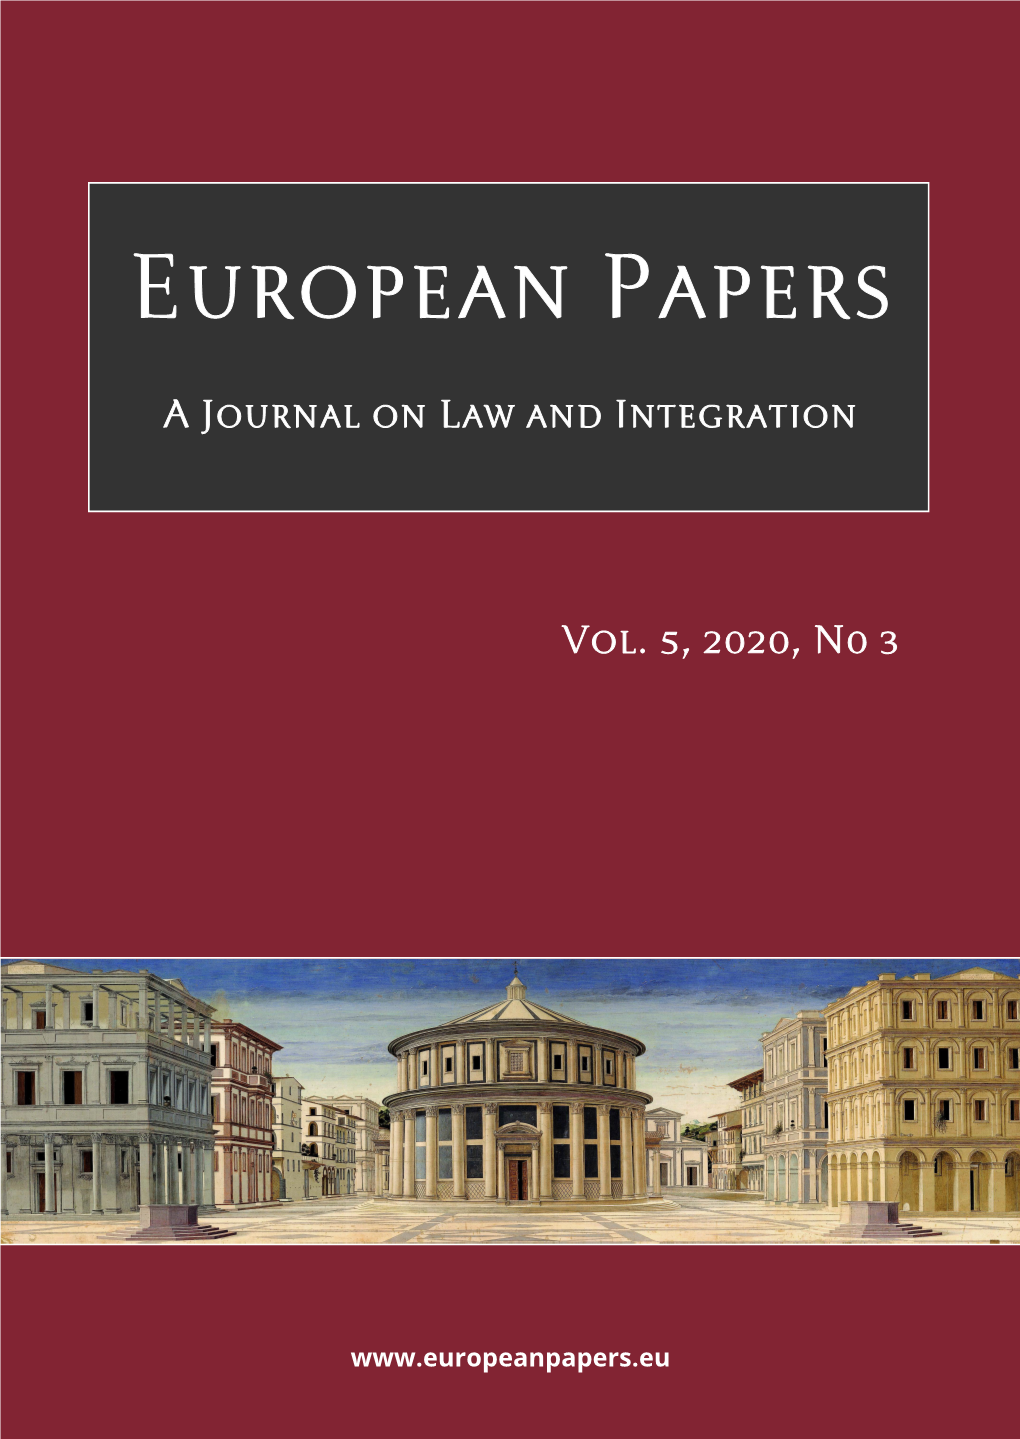 A Journal on Law and Integration, Vol. 5, 2020, No 3